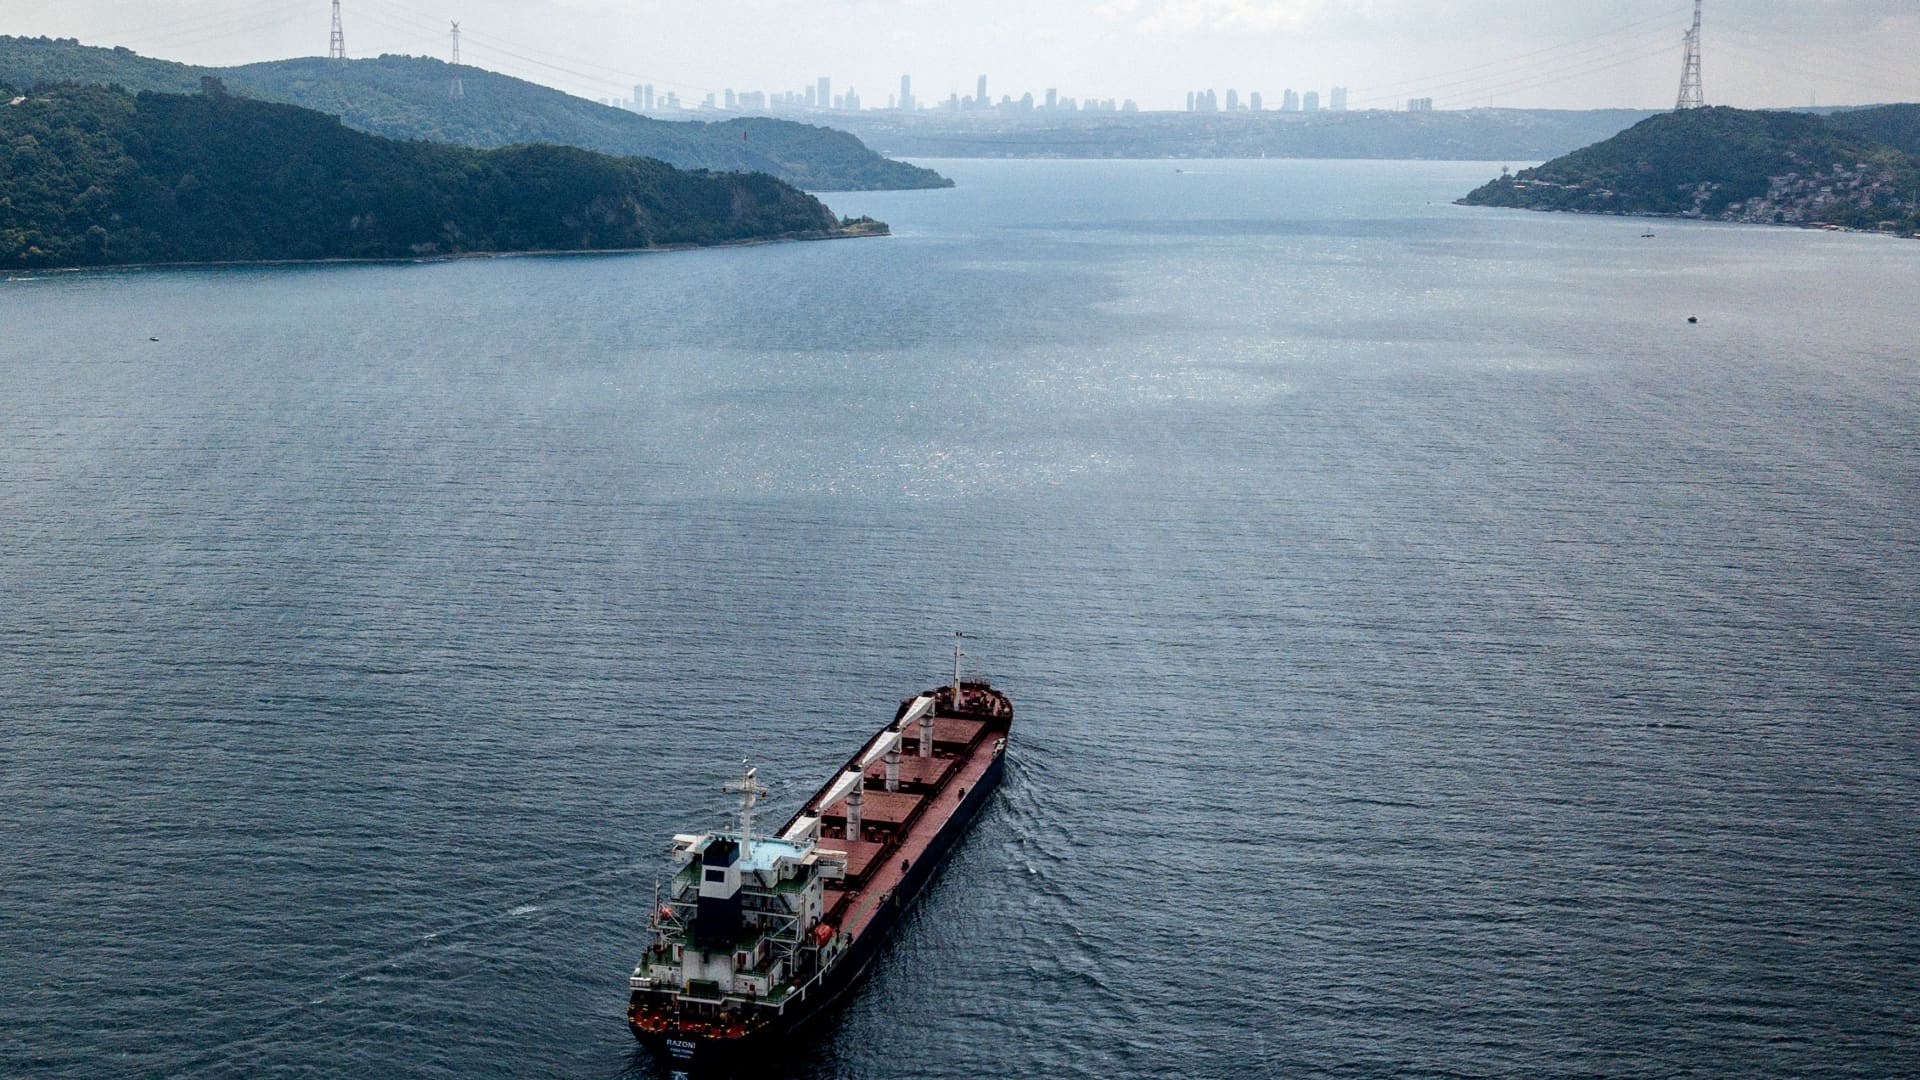 An aerial view shows the Sierra Leone-flagged cargo vessel Razoni sailing en route to Tripoli, Lebanon, along the Bosphorus Strait on August 3, 2022, after being officially inspected.